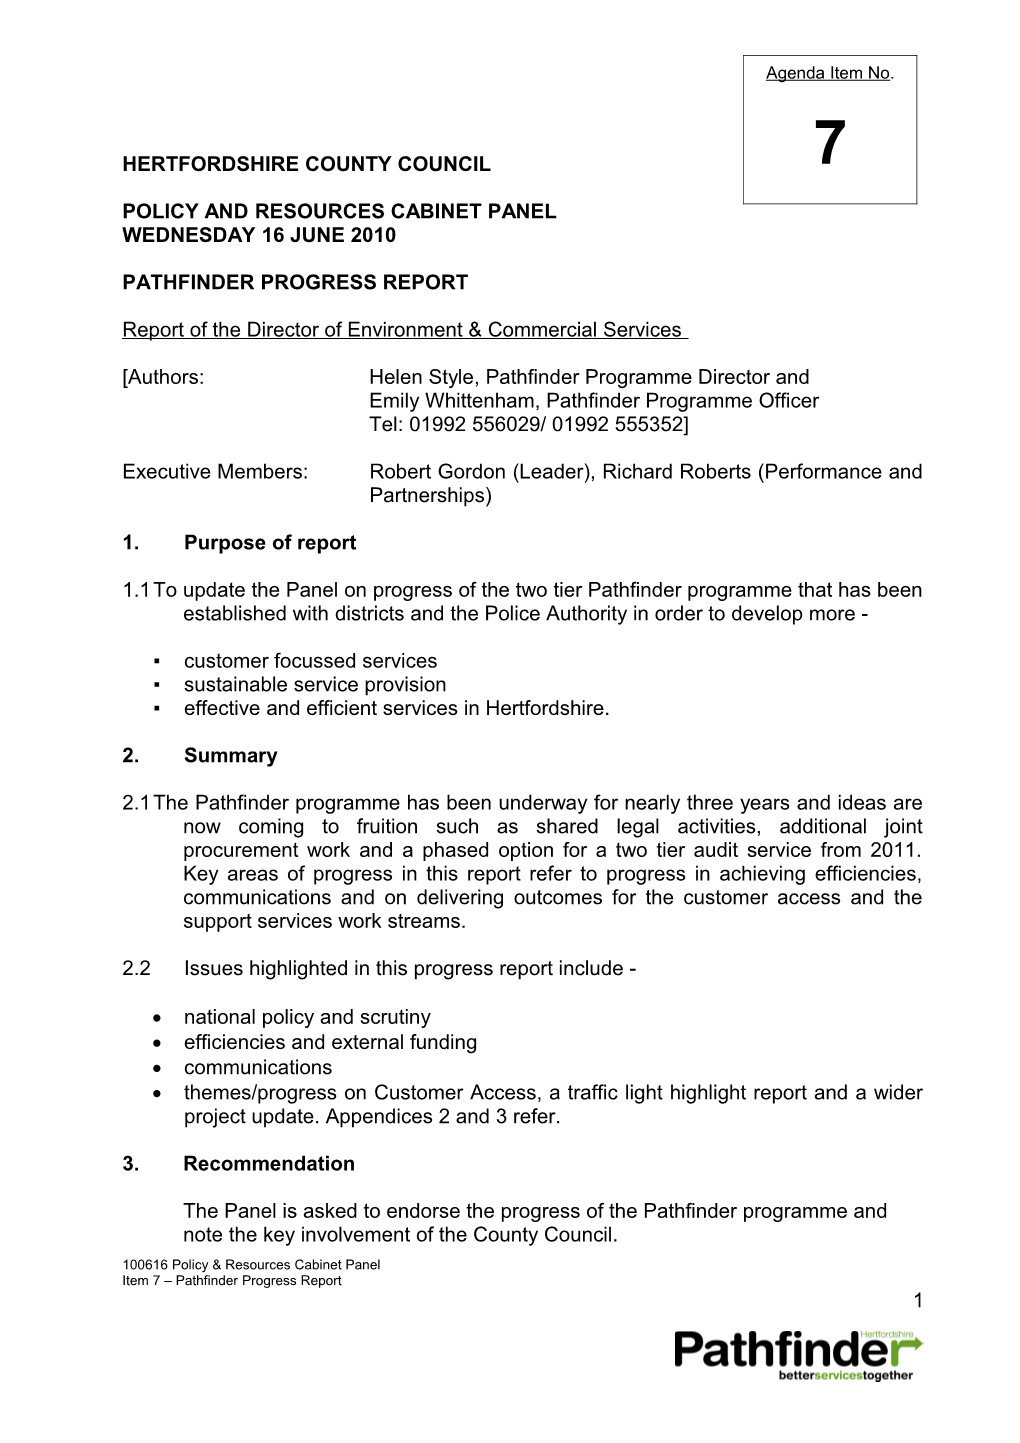 Policy & Resources Cabinet Panel 16 June 2010 at 2.00Pm Item 7 - Pathfinder Progress Report